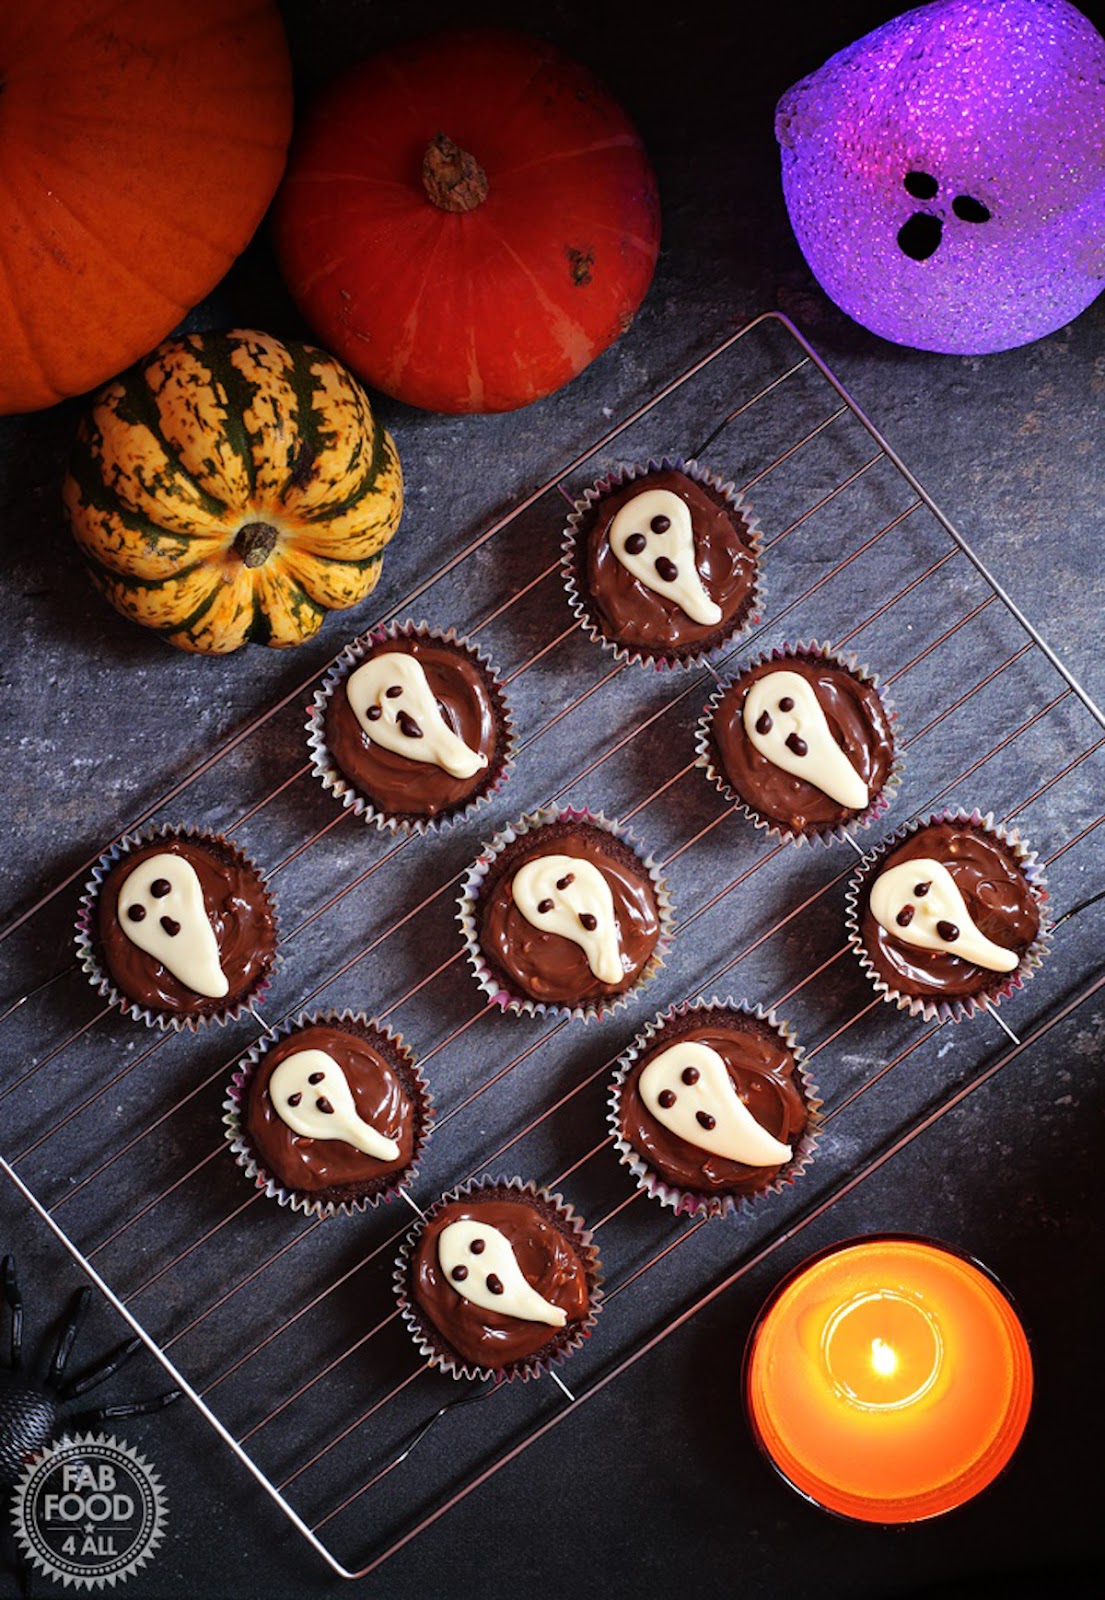 Cupcakes designed with a ghost icing on top.